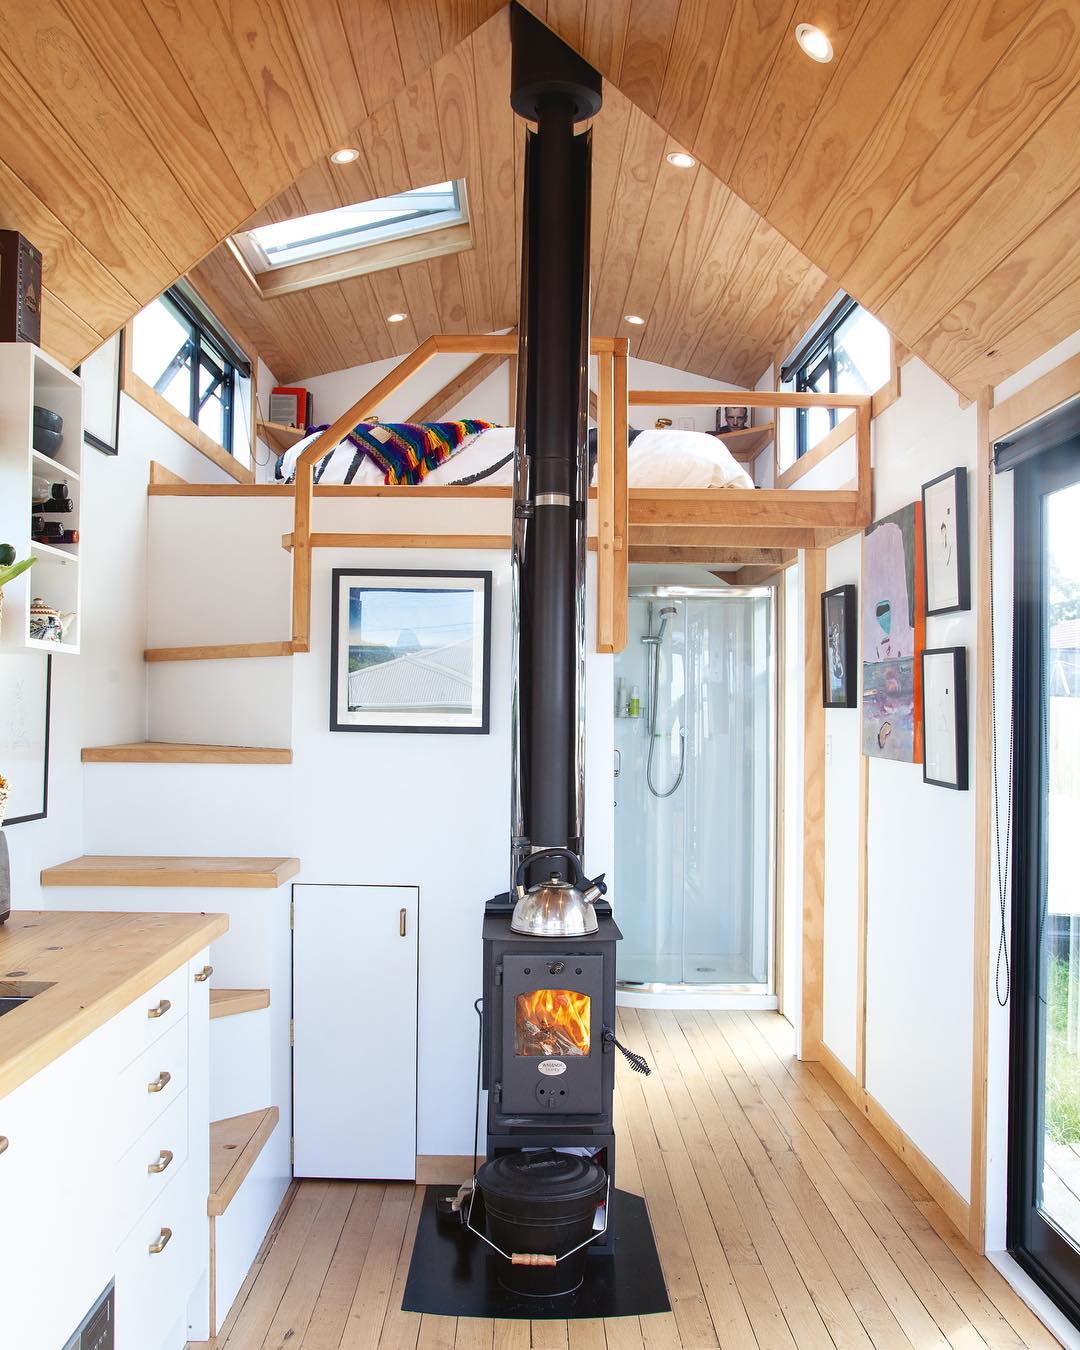 Tiny home with white walls and a black wood furnace. Photo by Instagram user @camandas_tinyhouse 